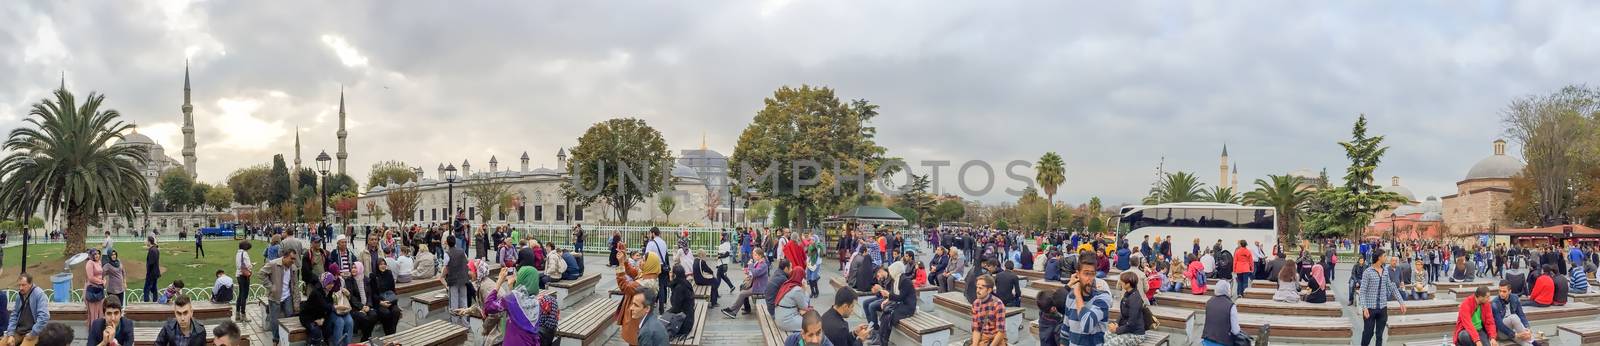 ISTANBUL - SEPTEMBER 21, 2014: Tourists enjoy city life in Sultanahmet Park. Istanbul attracts more than 10 million every year.